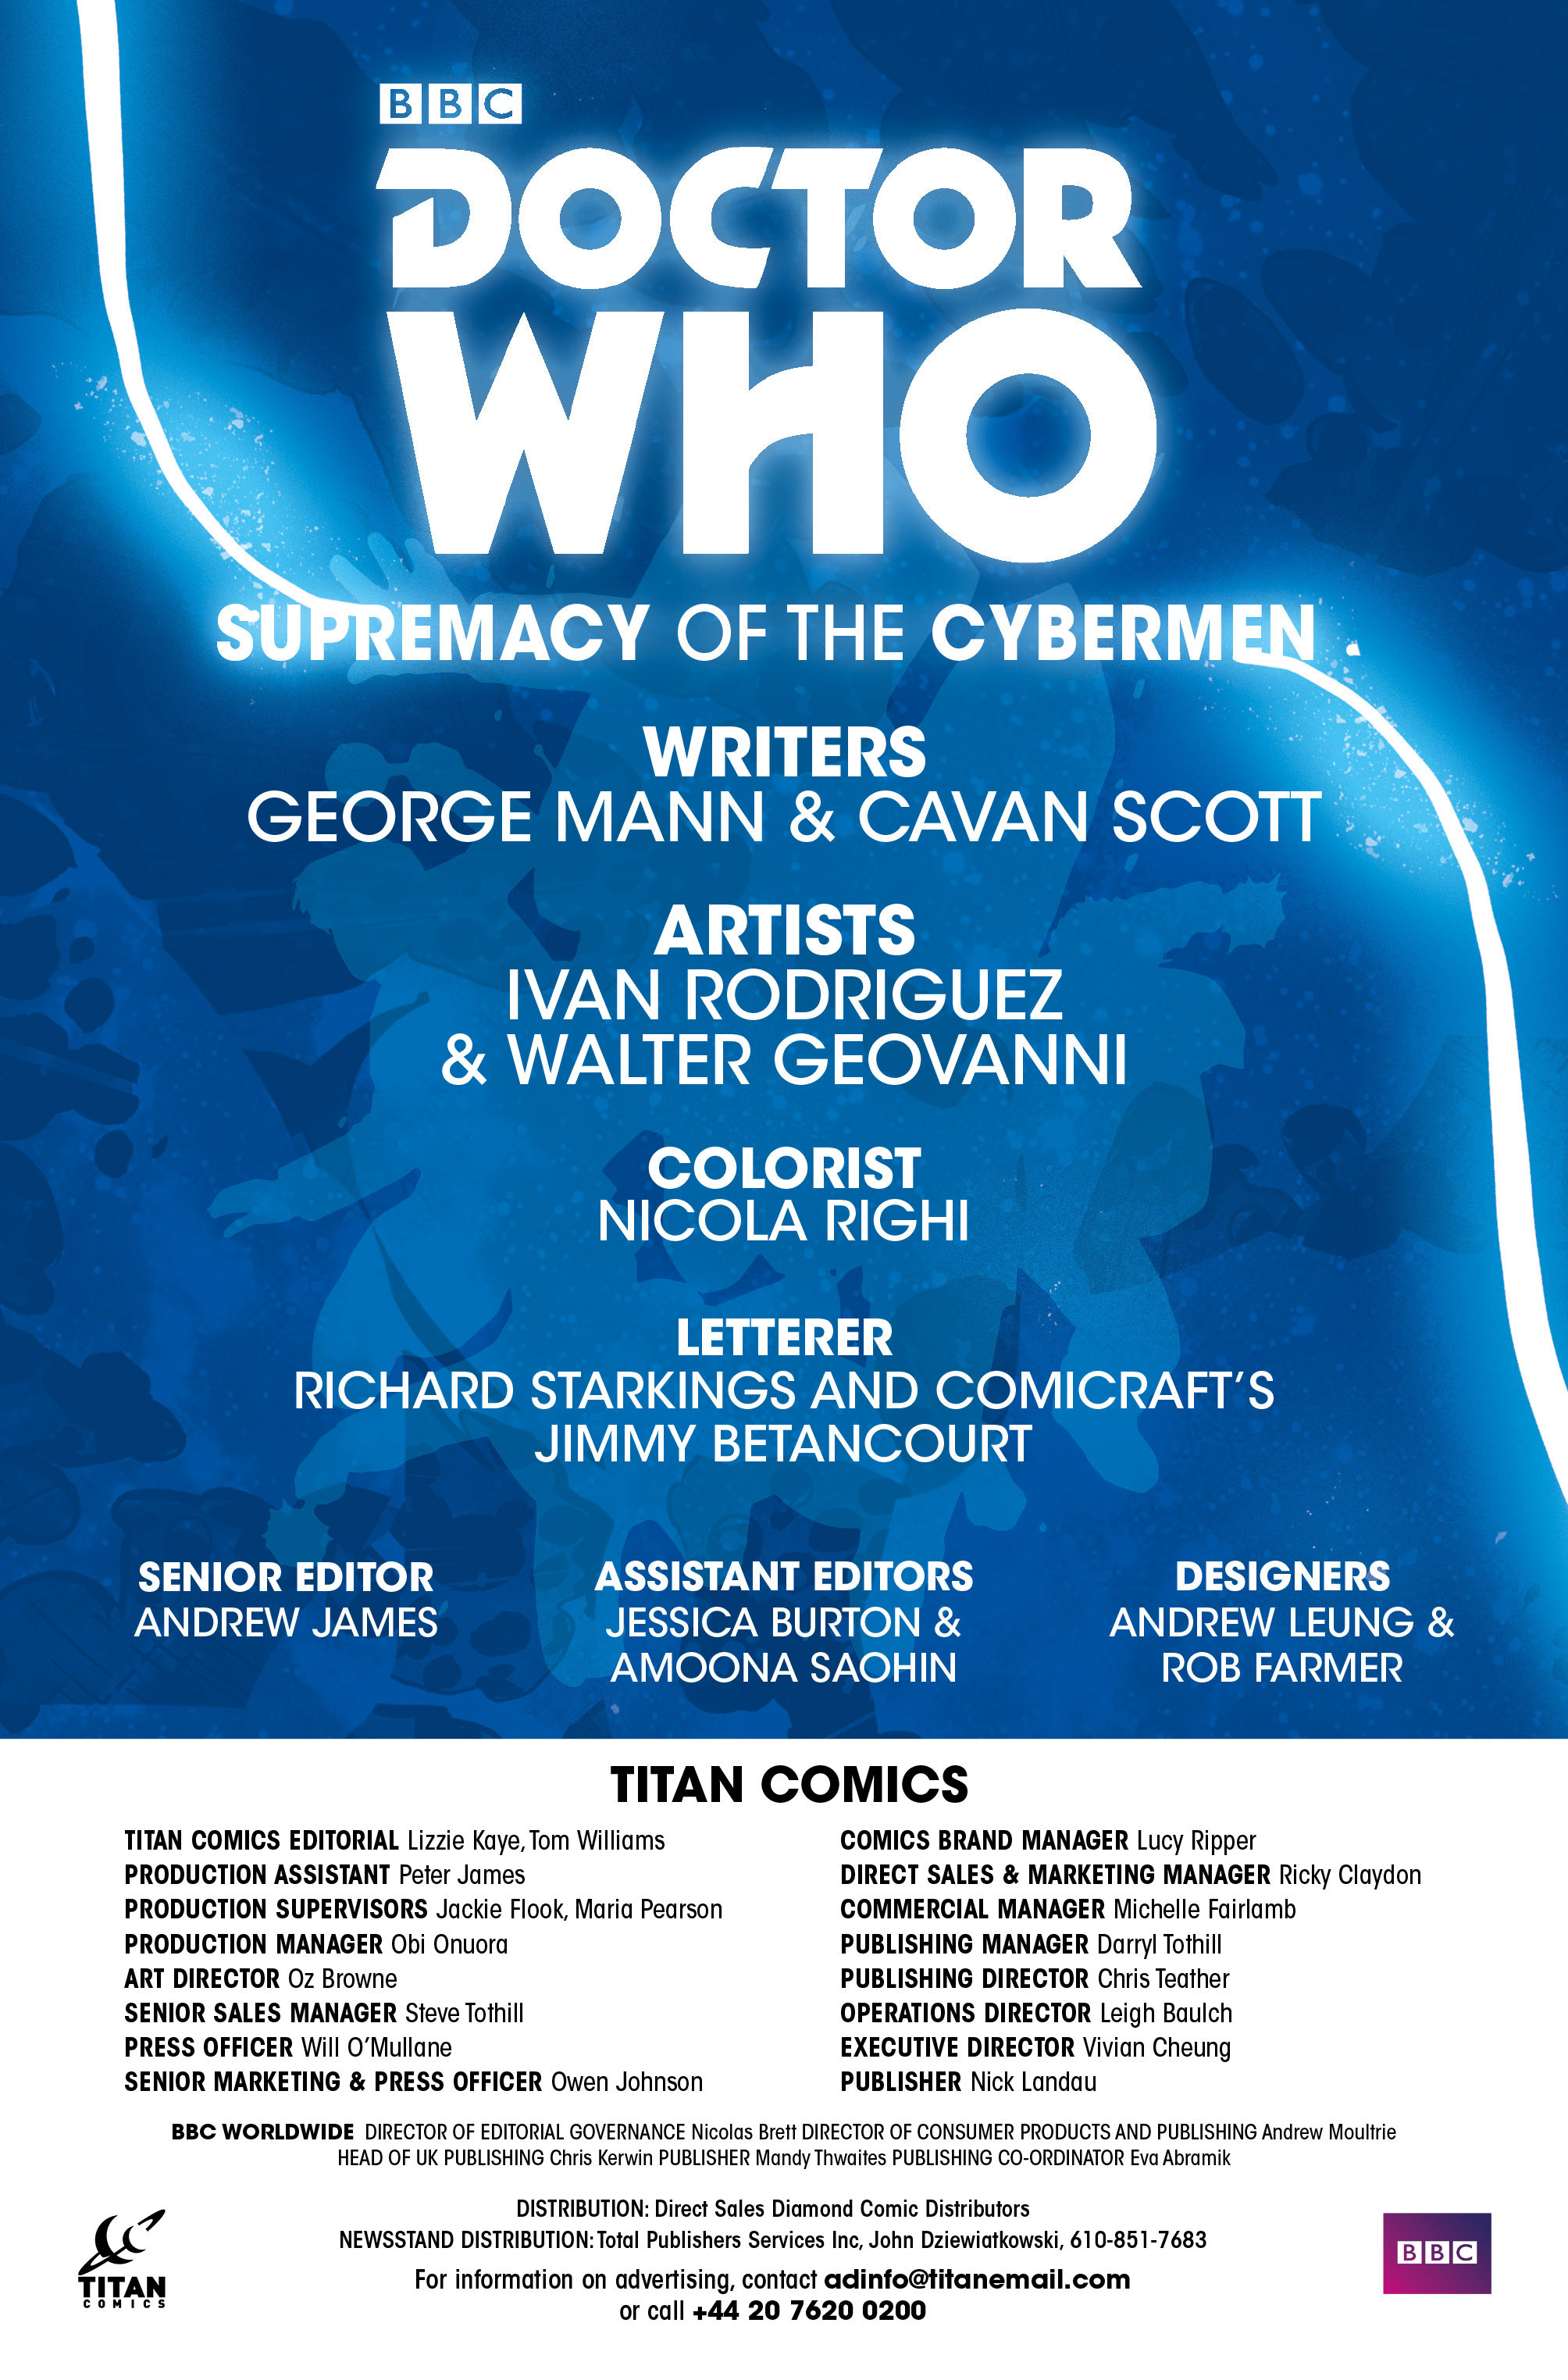 Read online Doctor Who Event 2016: Doctor Who Supremacy of the Cybermen comic -  Issue #2 - 6